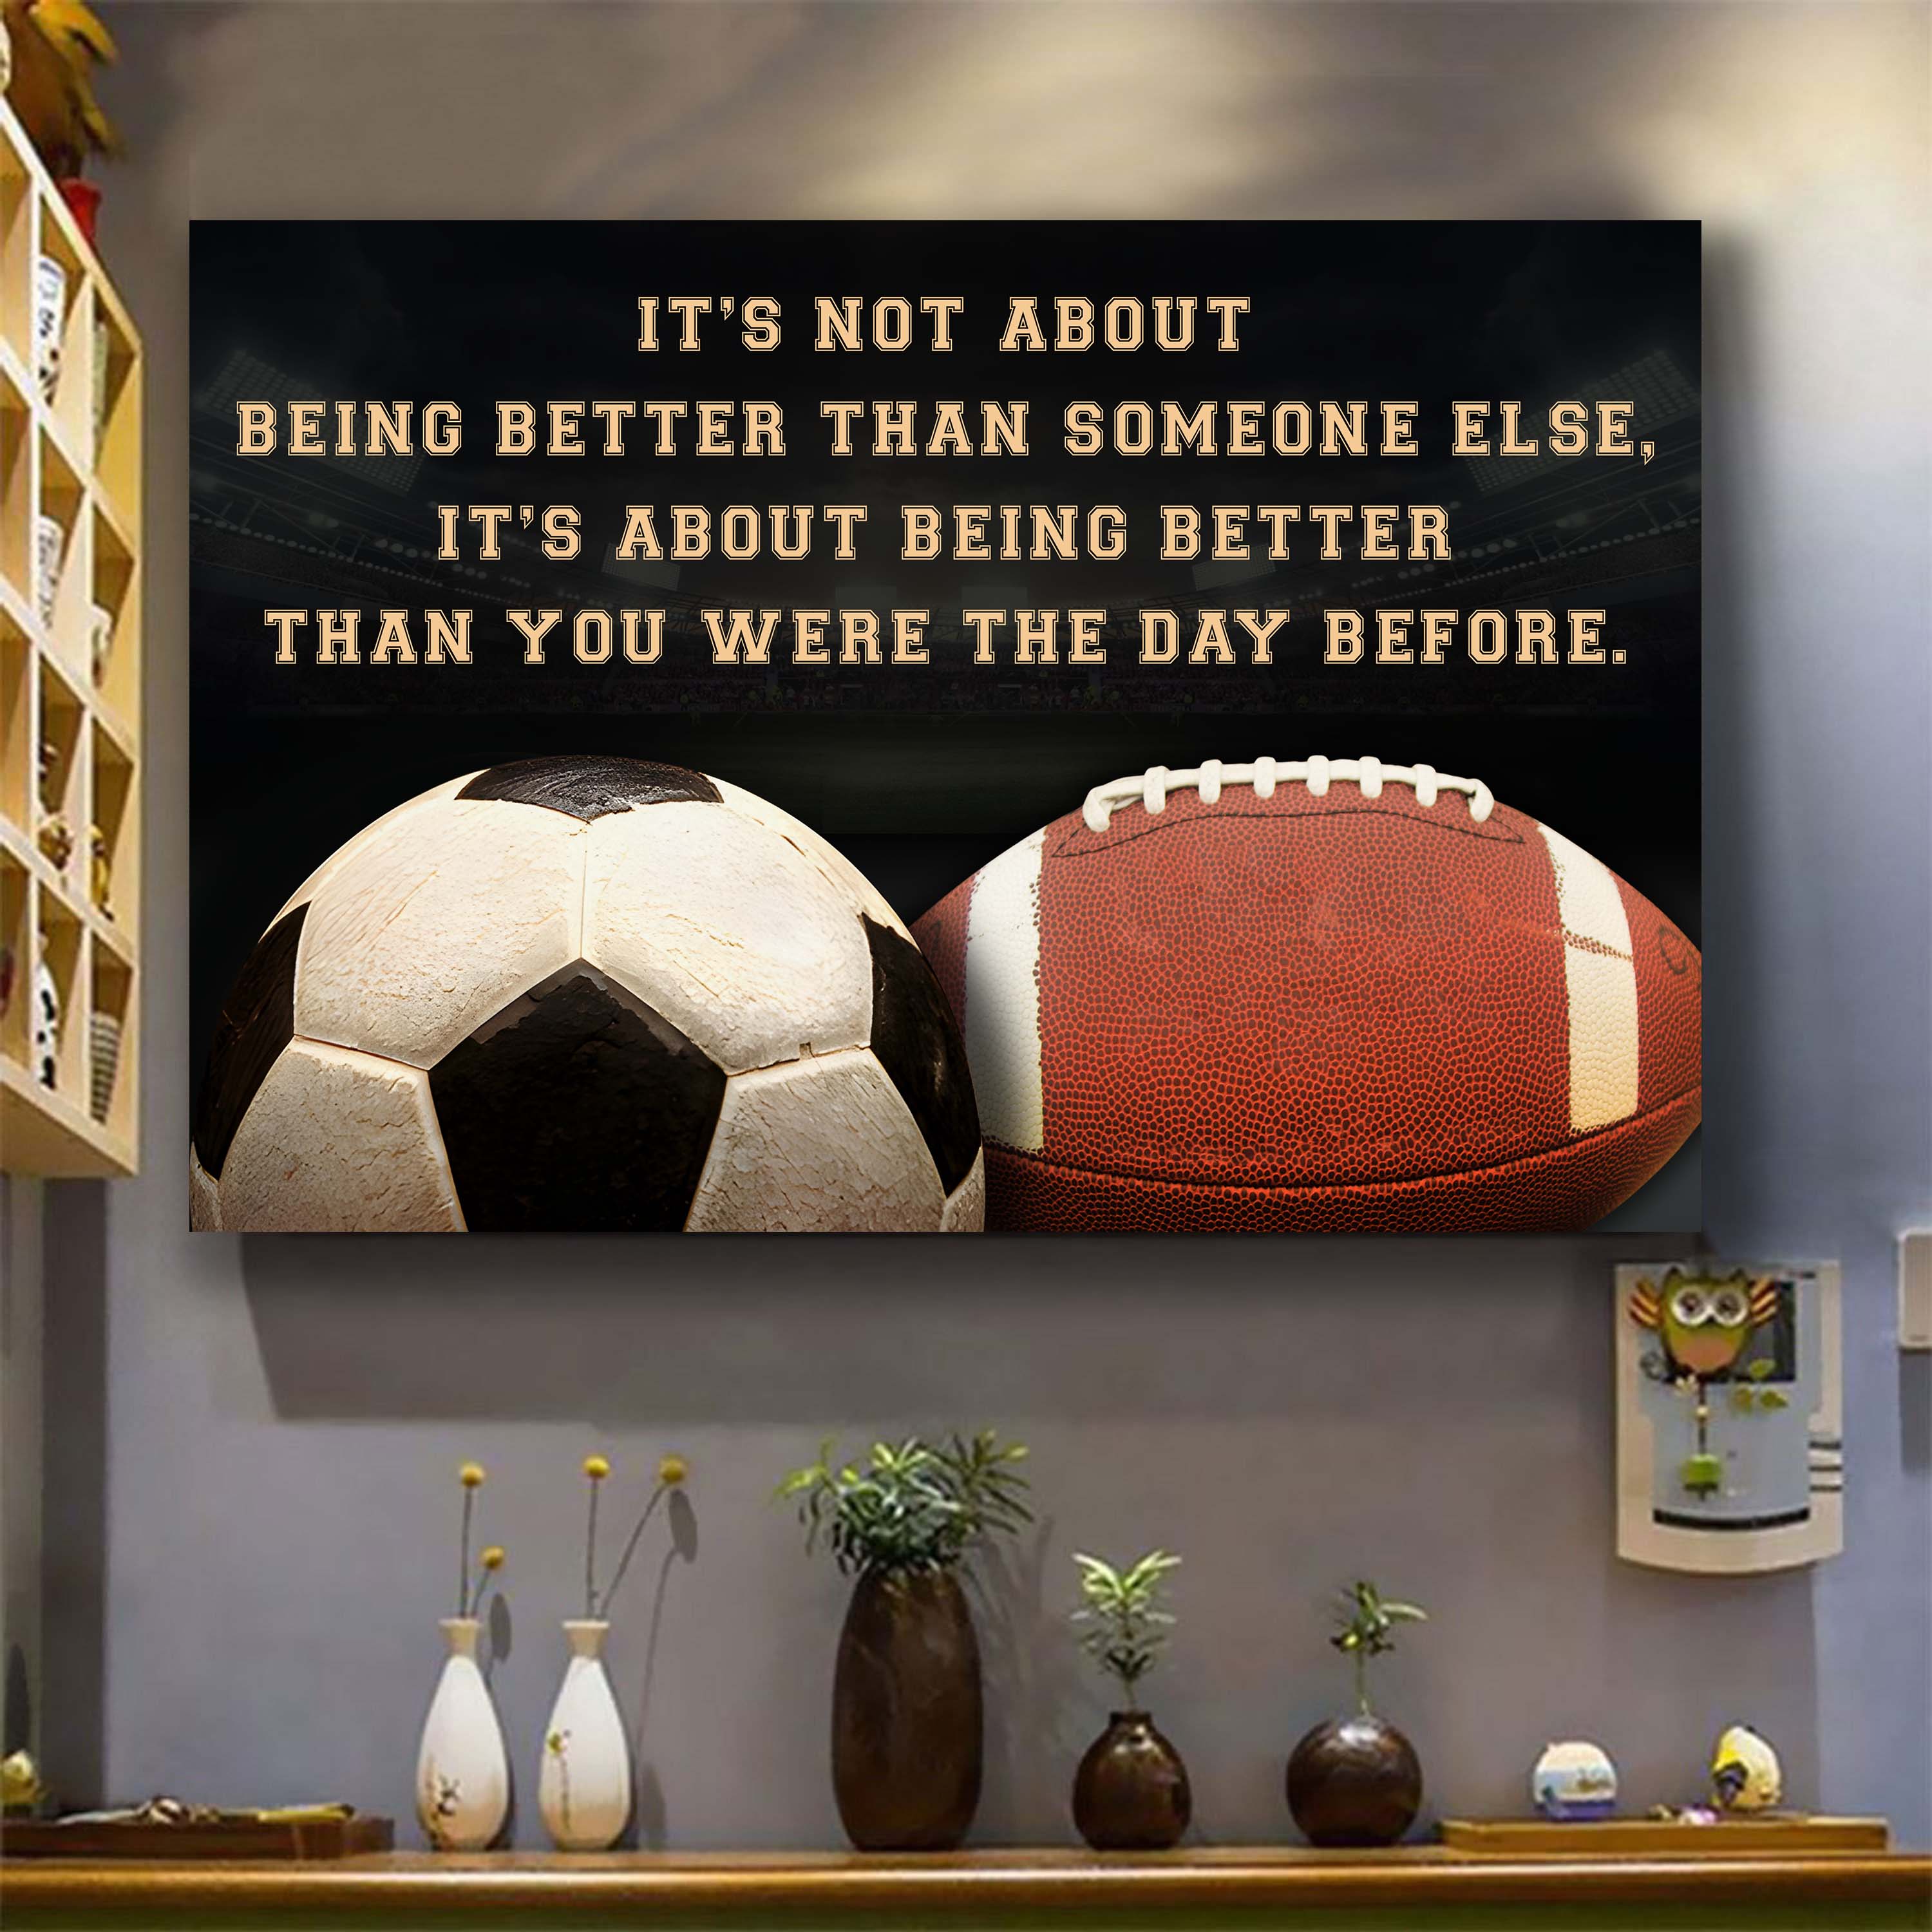 American football and Soccer customizable poster canvas - It is not about better than someone else, It is about being better than you were the day before